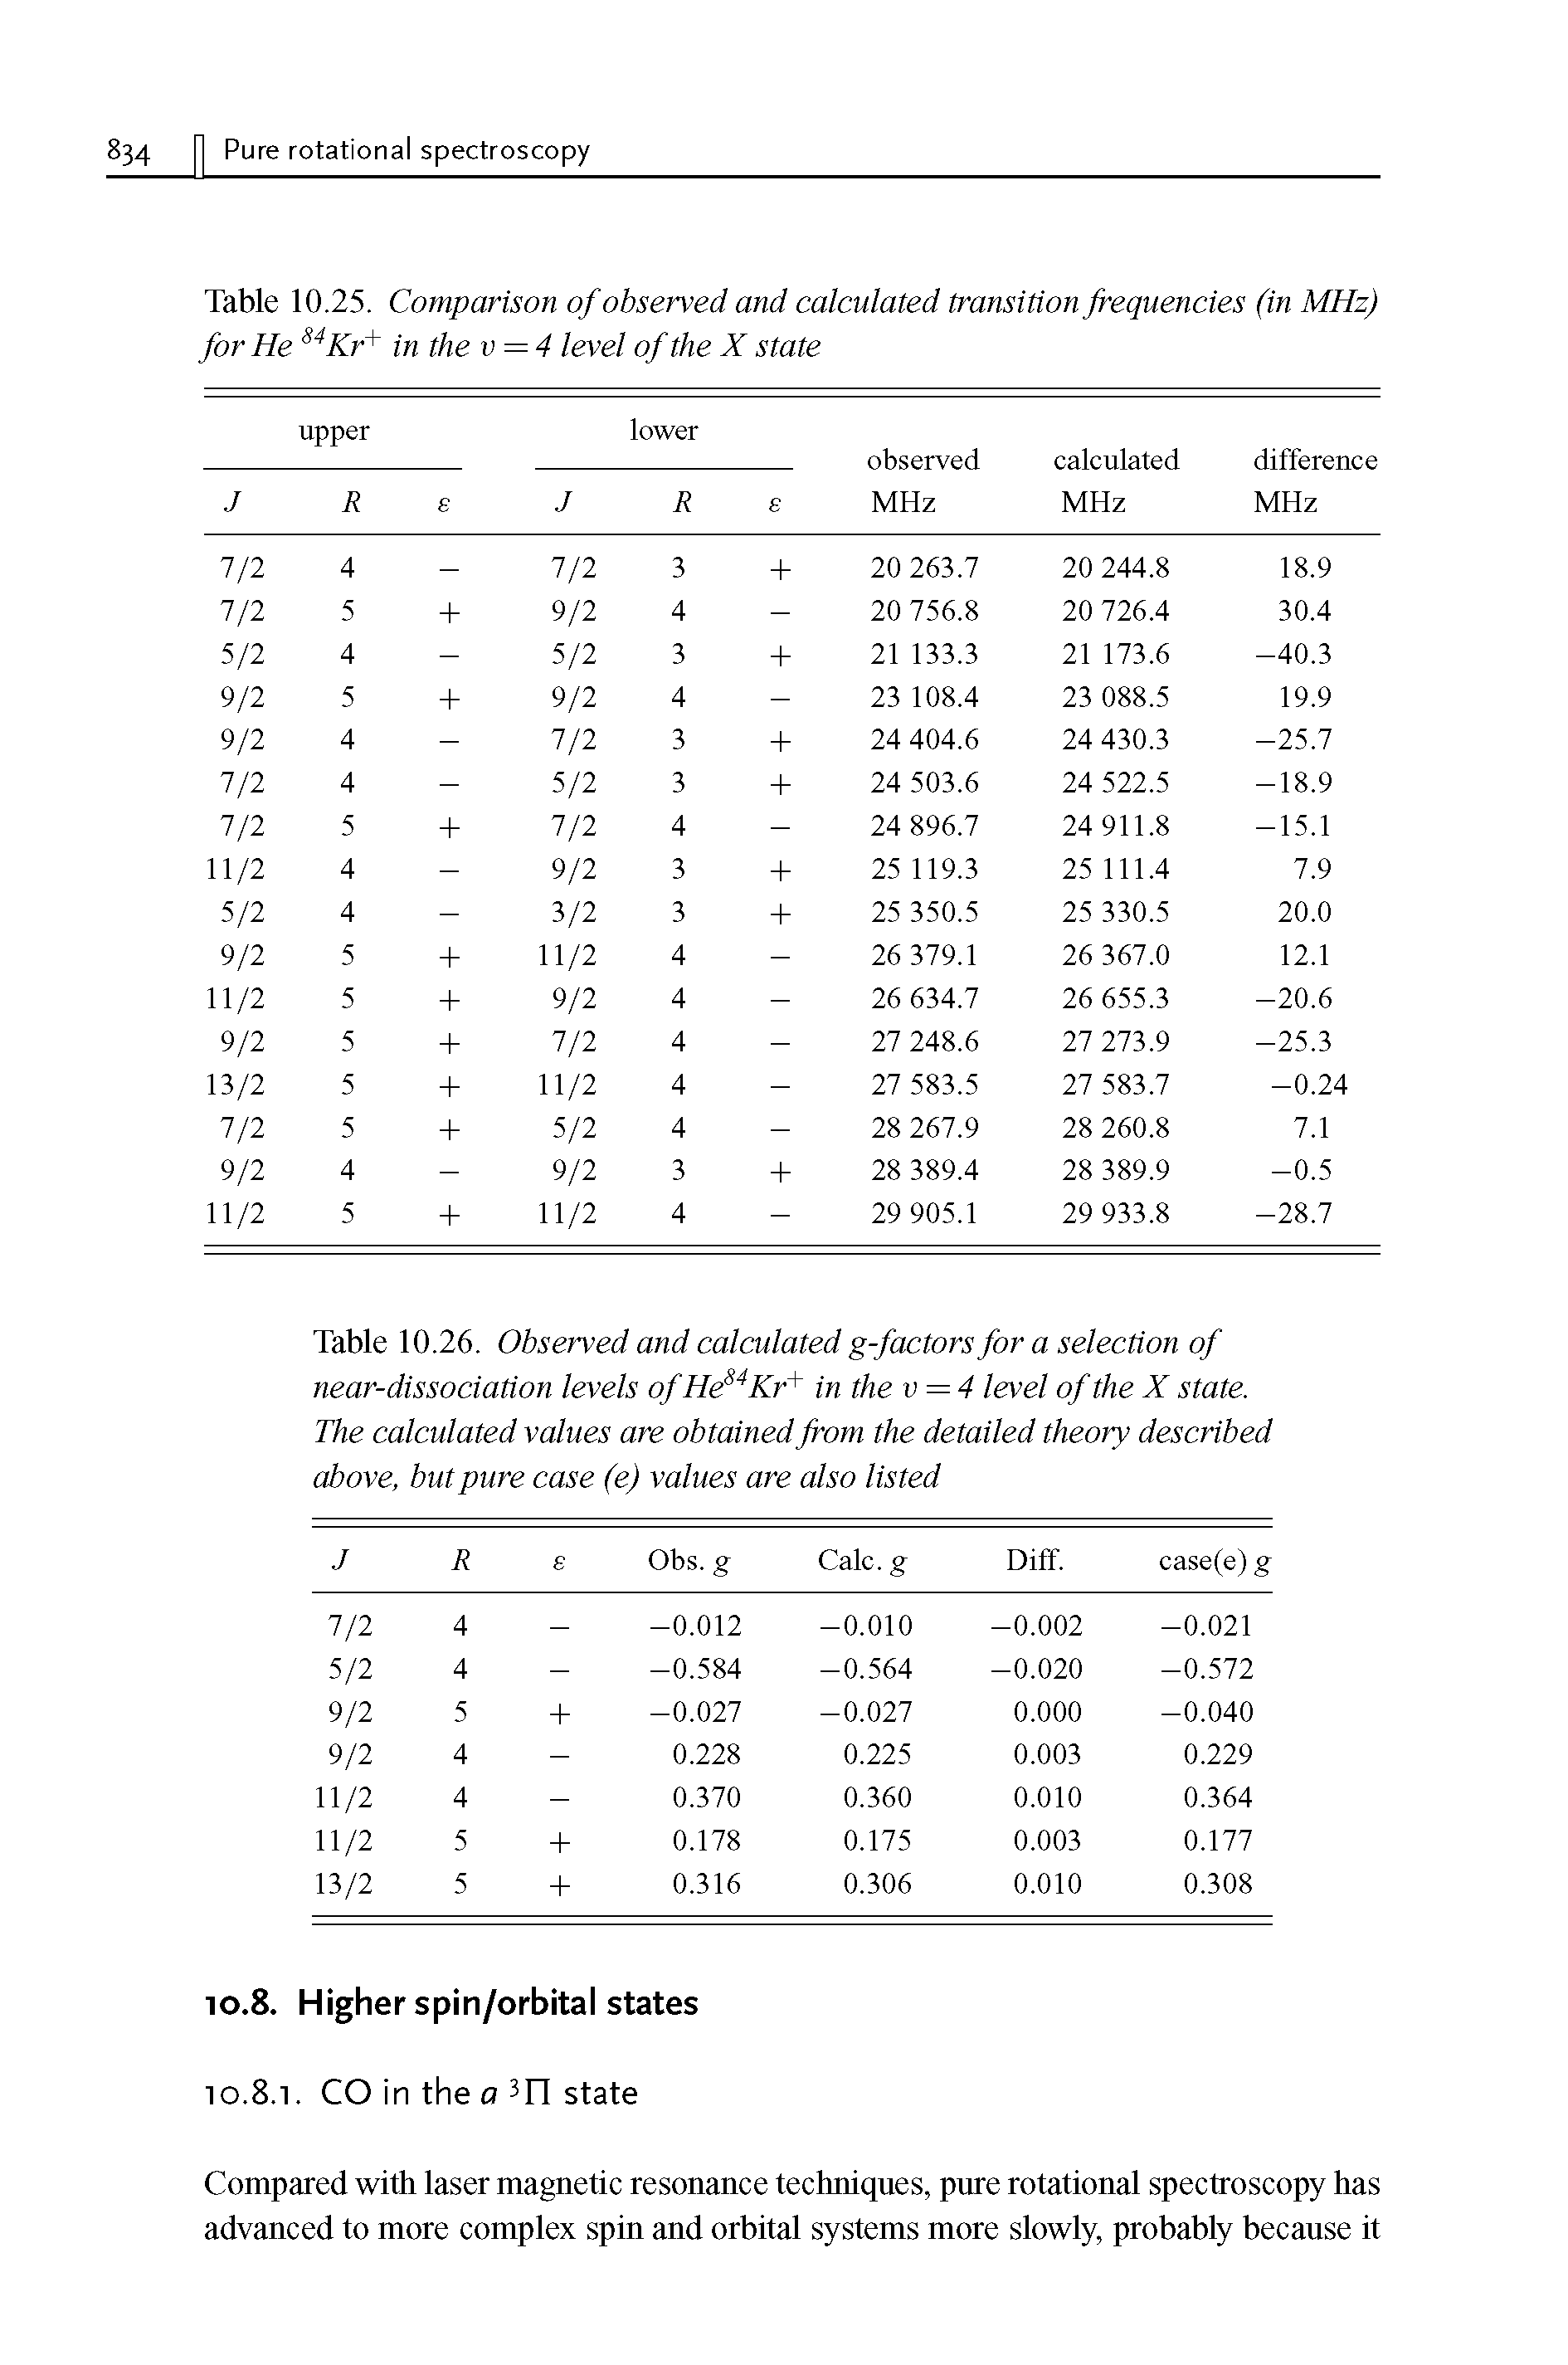 Table 10.26. Observed and calculated g-factors for a selection of near-dissociation levels of He84Kr+ in the v = 4 level of the X state. The calculated values are obtained from the detailed theory described above, but pure case (e) values are also listed...